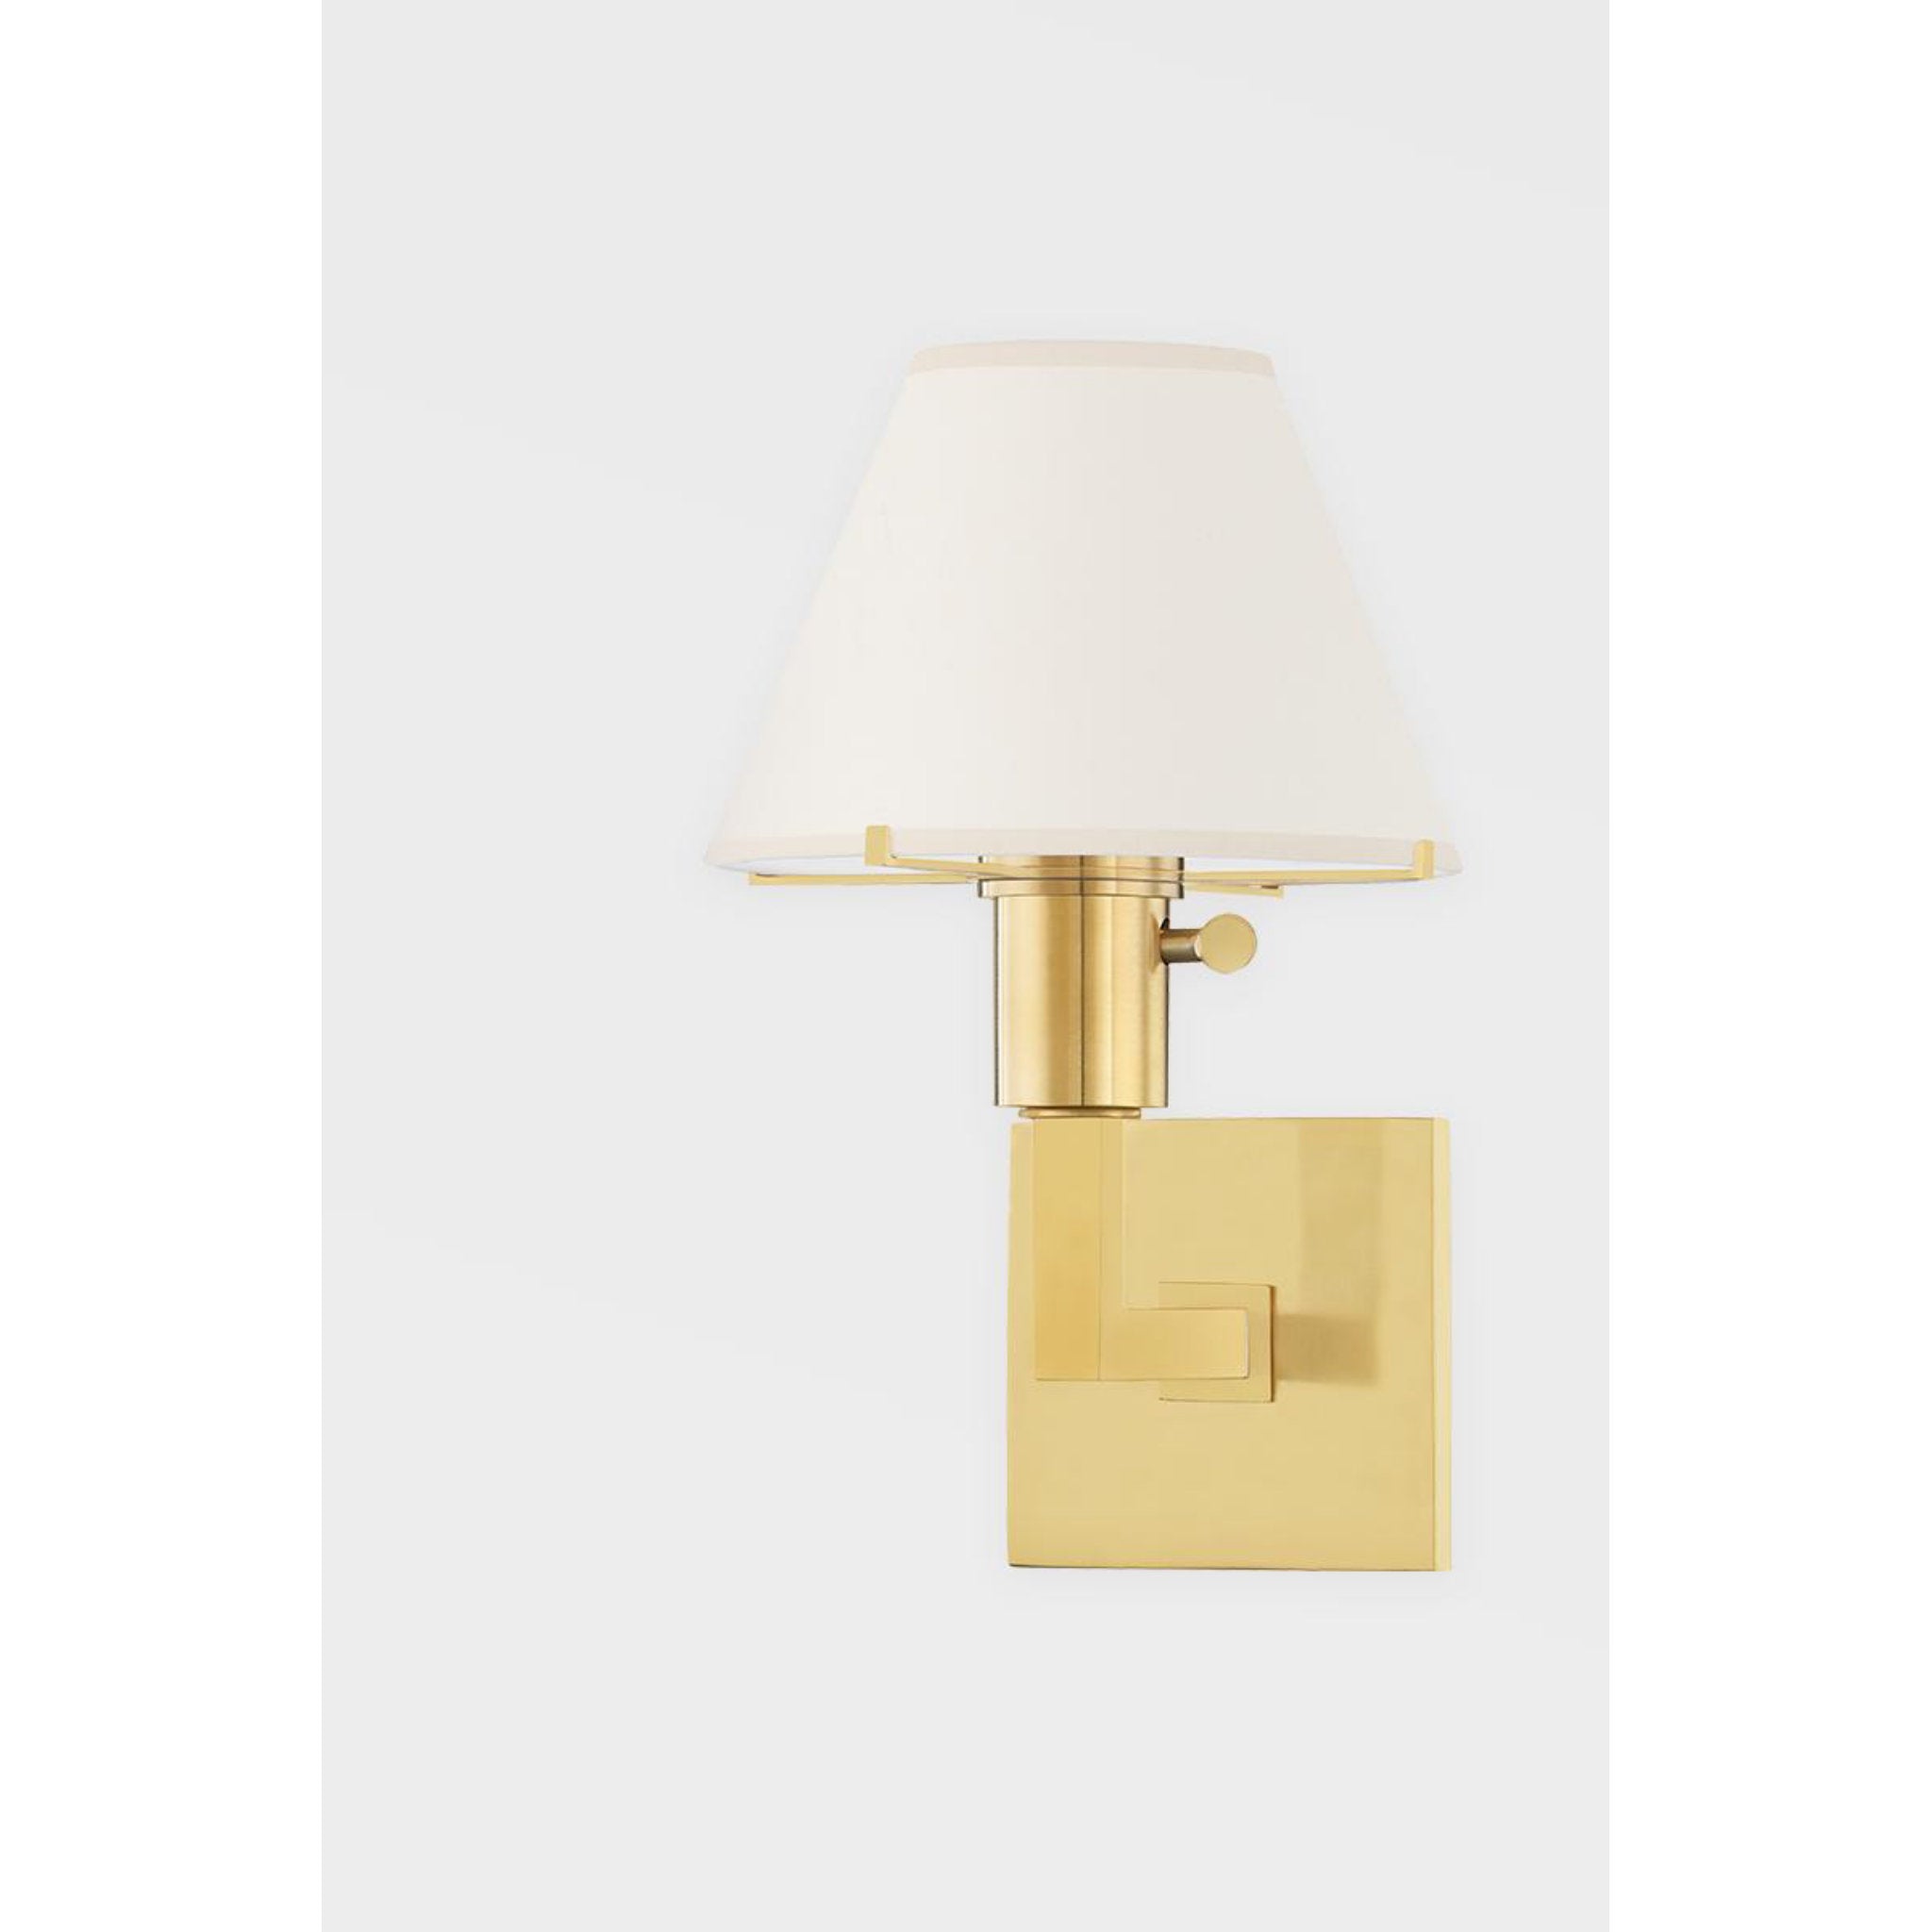 Leeds 1 Light Floor Lamp in Aged Brass by Mark D. Sikes